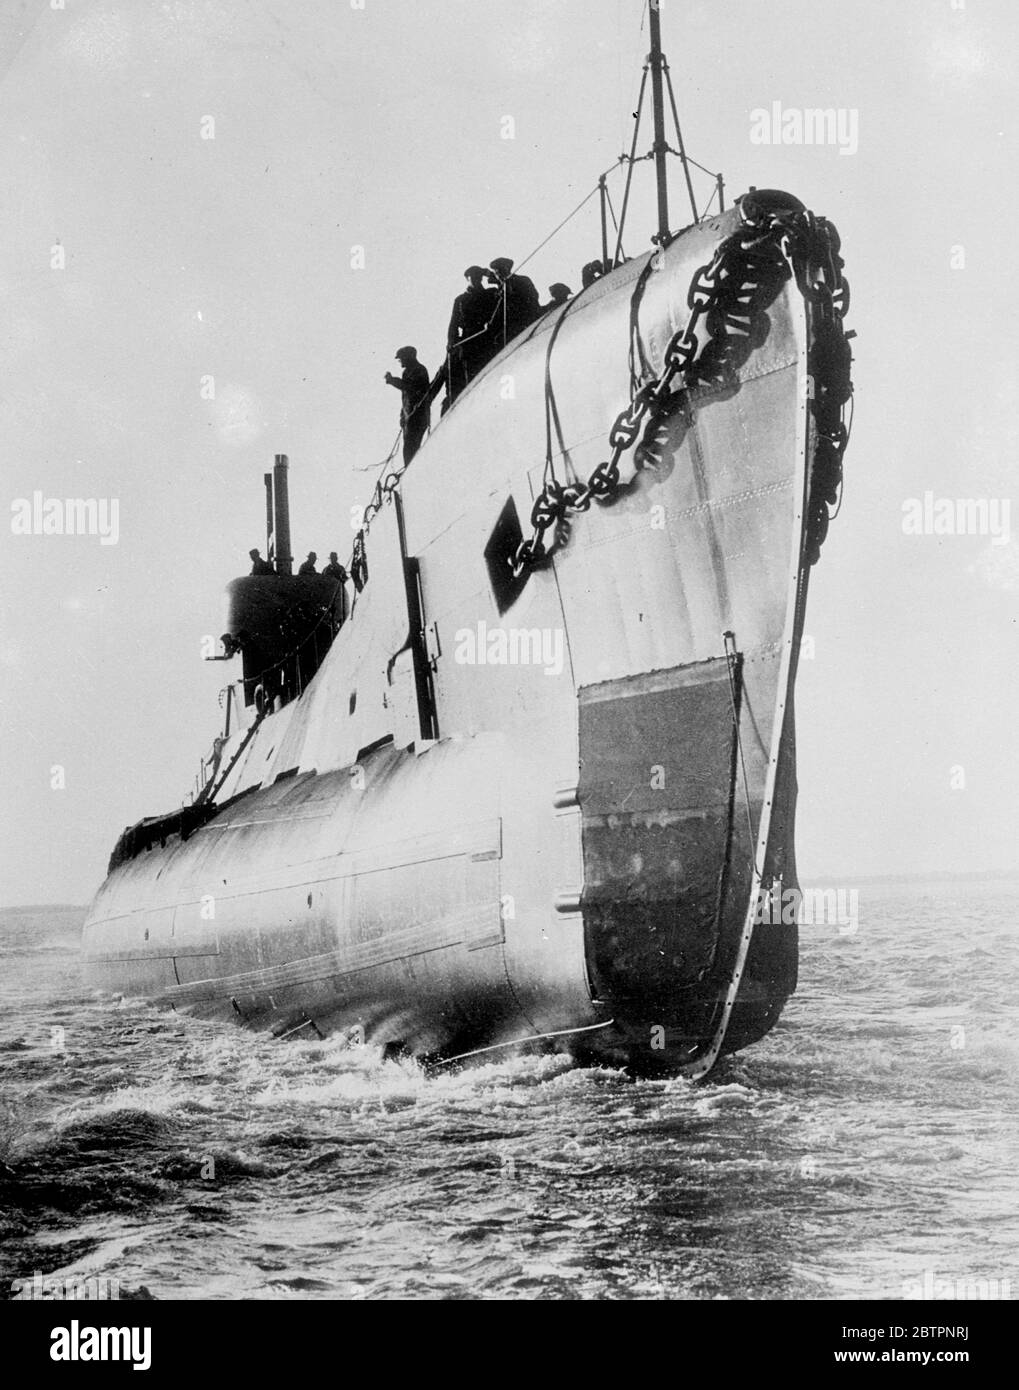 British submarines collide during exercises. The British submarines HMS Snapper and HMS Severn came into collision during exercises, it is reported from Malta. The Snappers periscope was broken off. Photo shows, HMS Severn one of the submarines. 24 February 1938 Stock Photo